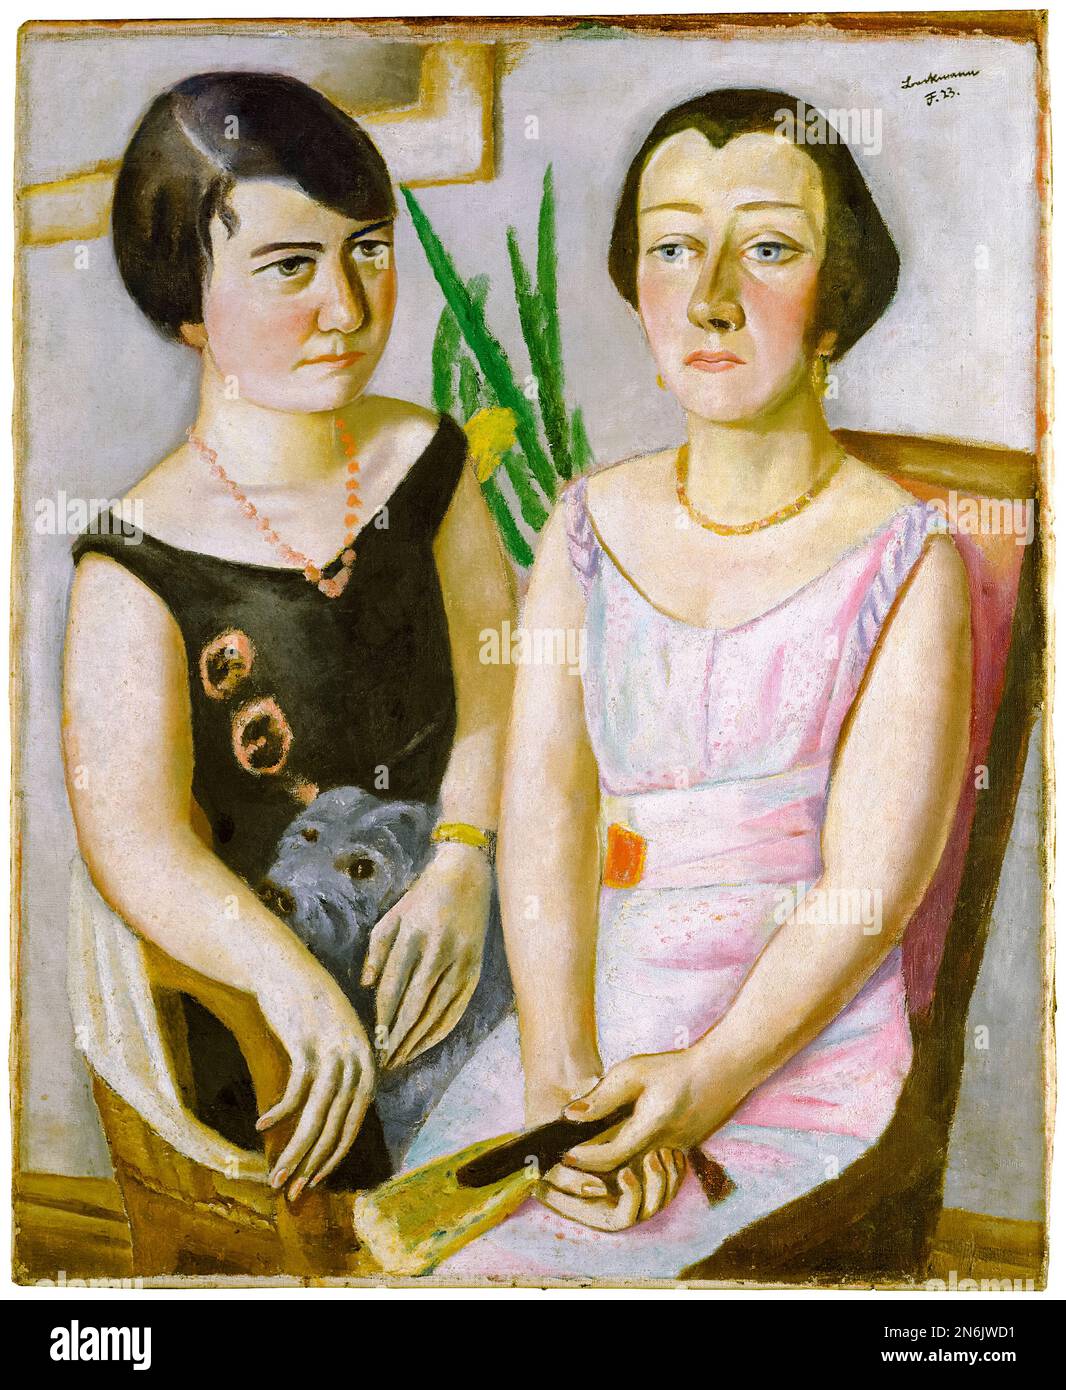 Max Beckmann, Double Portrait, painting in oil on canvas, 1923 Stock Photo